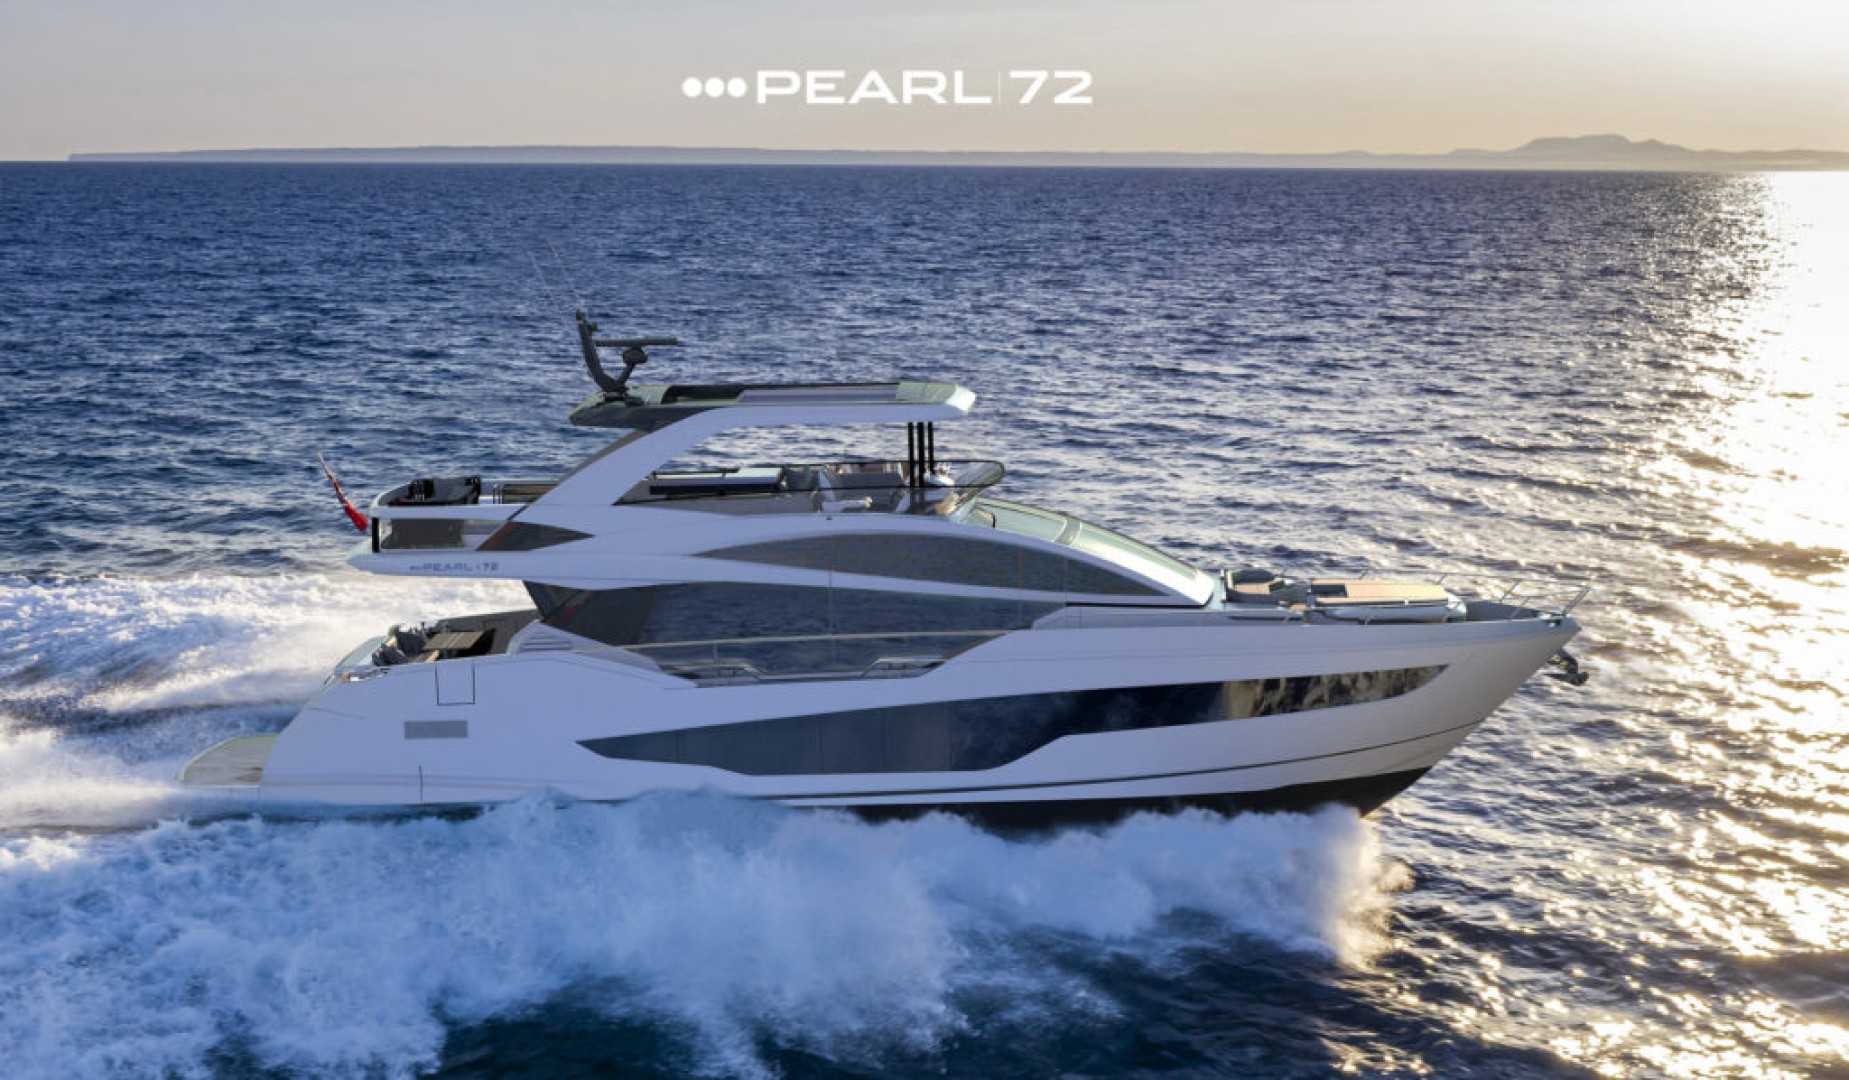 The new Pearl 72 at Fort Lauderdale International Boat Show 2022